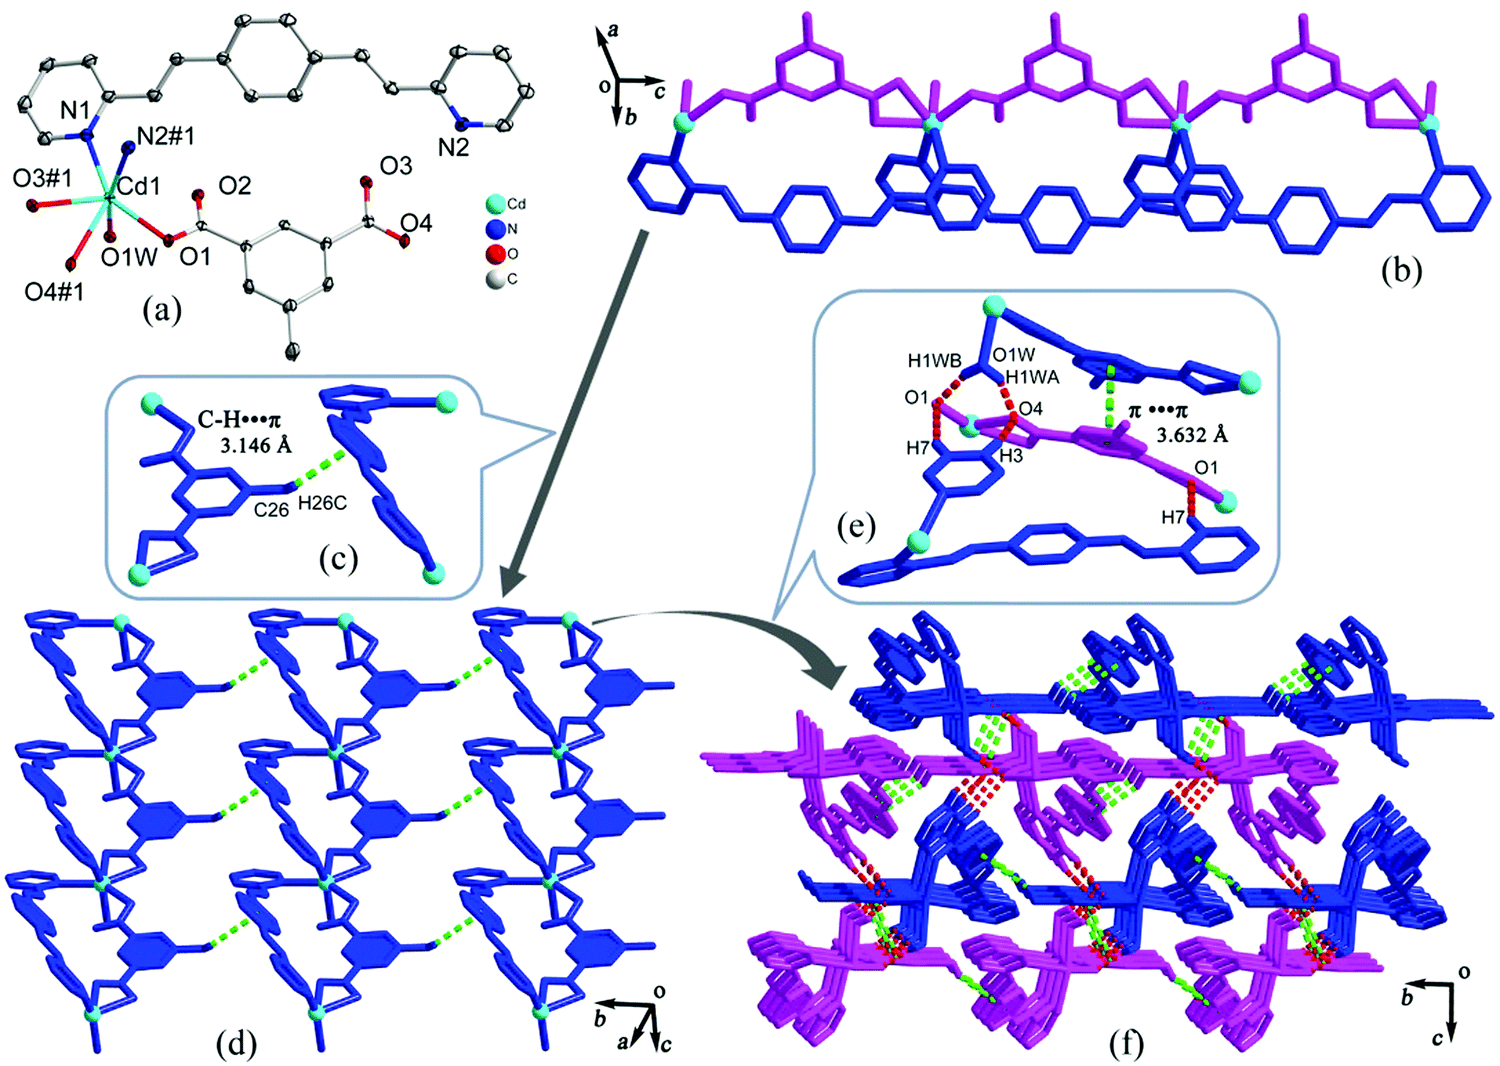 Cadmium Ii Coordination Polymers Based On 2 4 E 2 Pyridine 2 Yl Vinyl Styryl Pyridine And Dicarboxylate Ligands As Fluorescent Sensors For Tnp Journal Of Materials Chemistry C Rsc Publishing